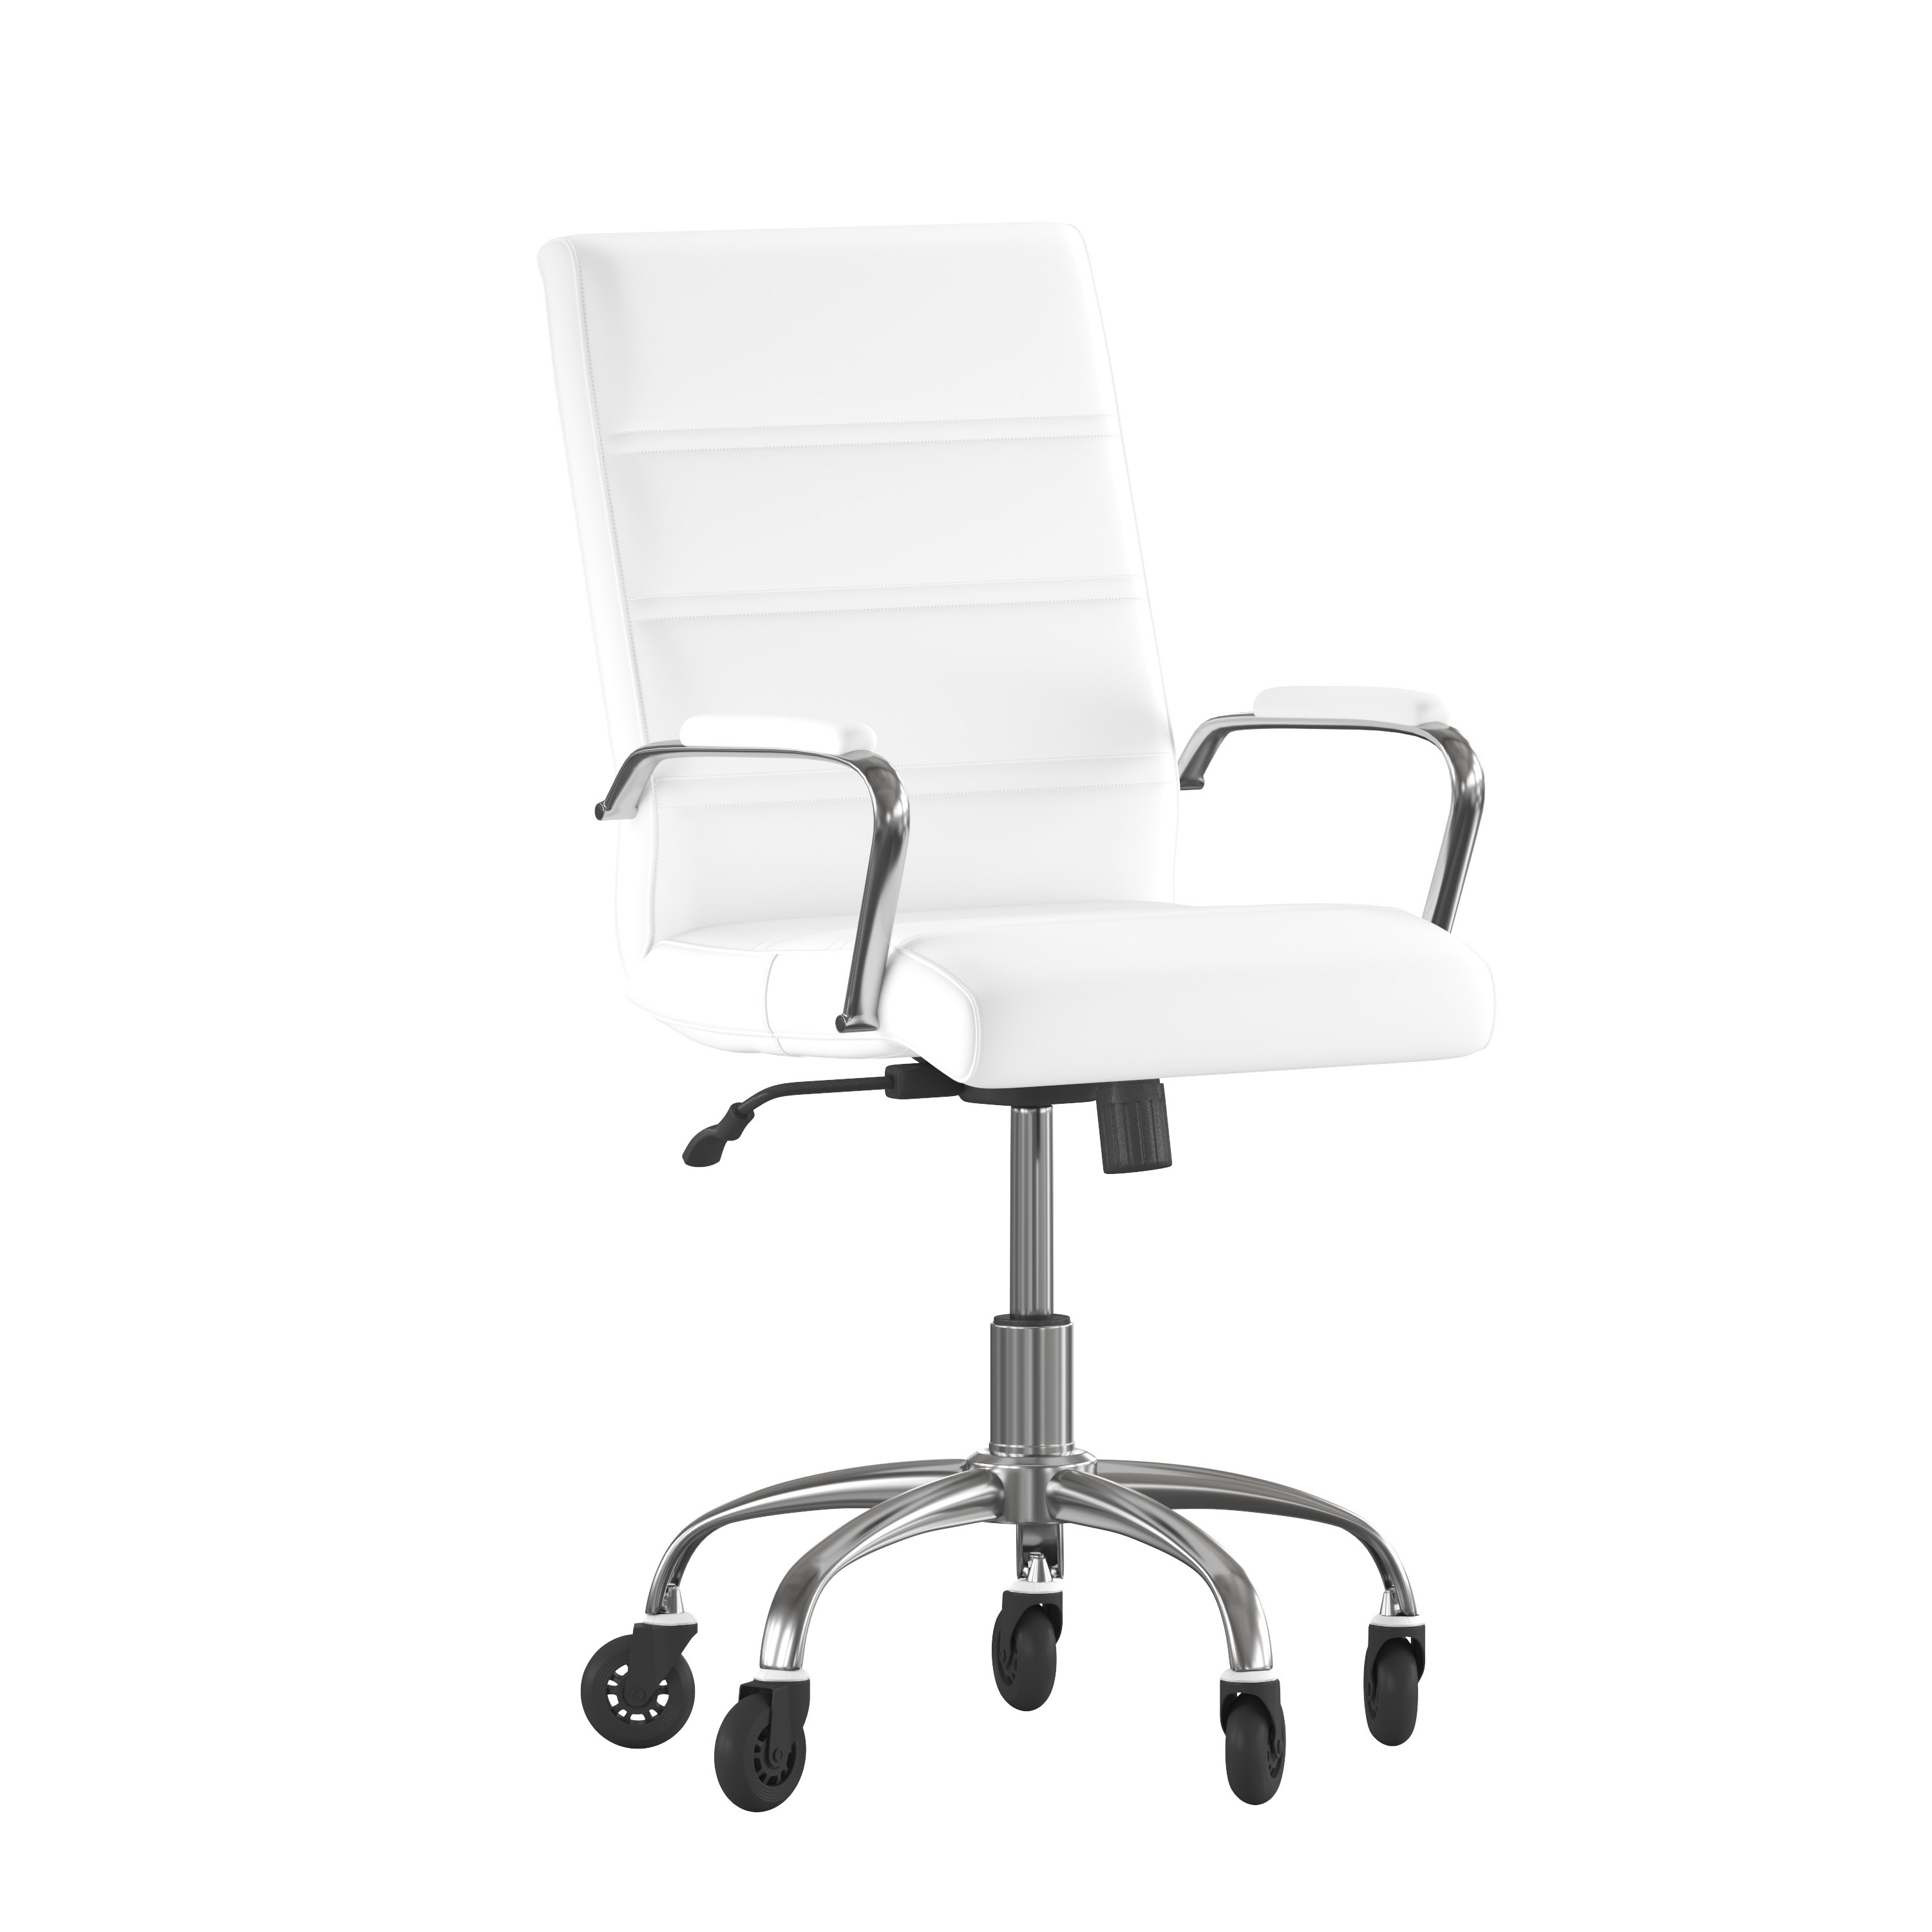 Flash Furniture GO-2286M-WH-RLB-GG Mid-Back White LeatherSoft Executive Swivel Office Chair with Chrome Frame, Arms, and Transparent Roller Wheels